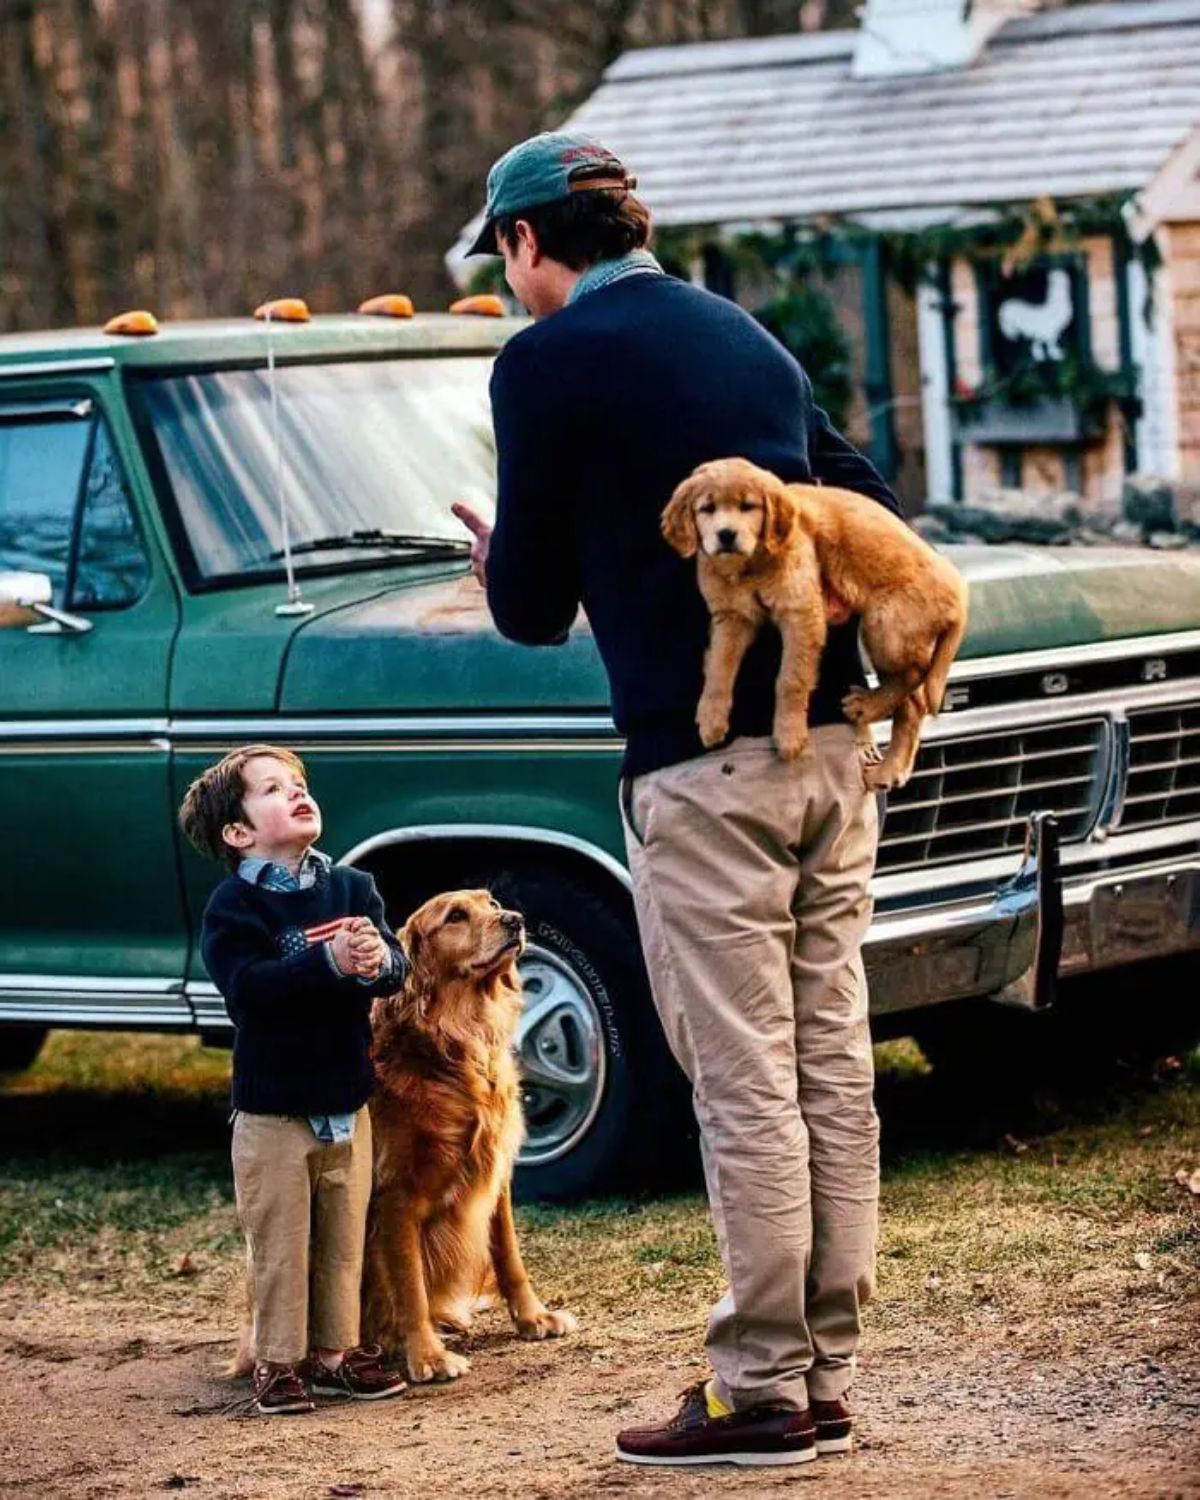 little boy standing next to a golden retriever sitting on grass in front of a man who is holding a golden retriever puppy behind his back